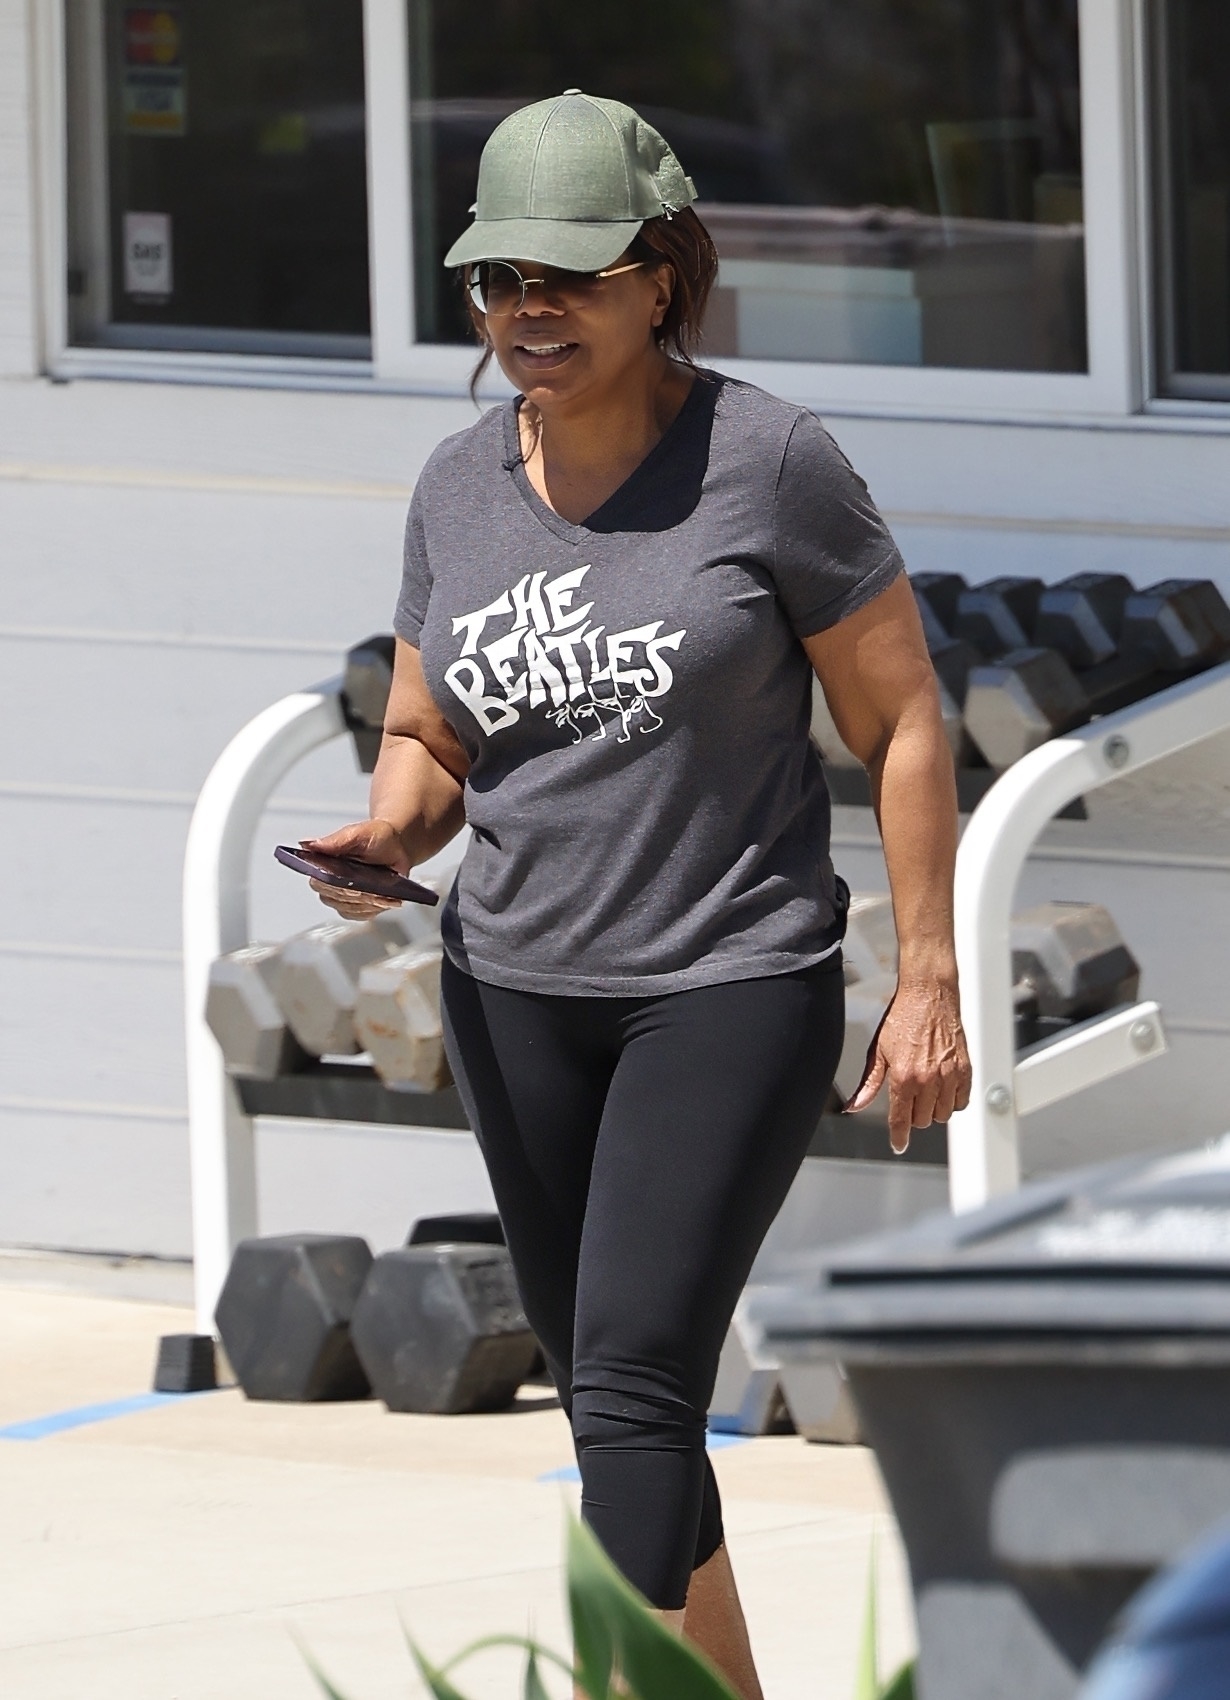 Oprah Winfrey has lost more than 40 pounds and she has been proudly showing it off